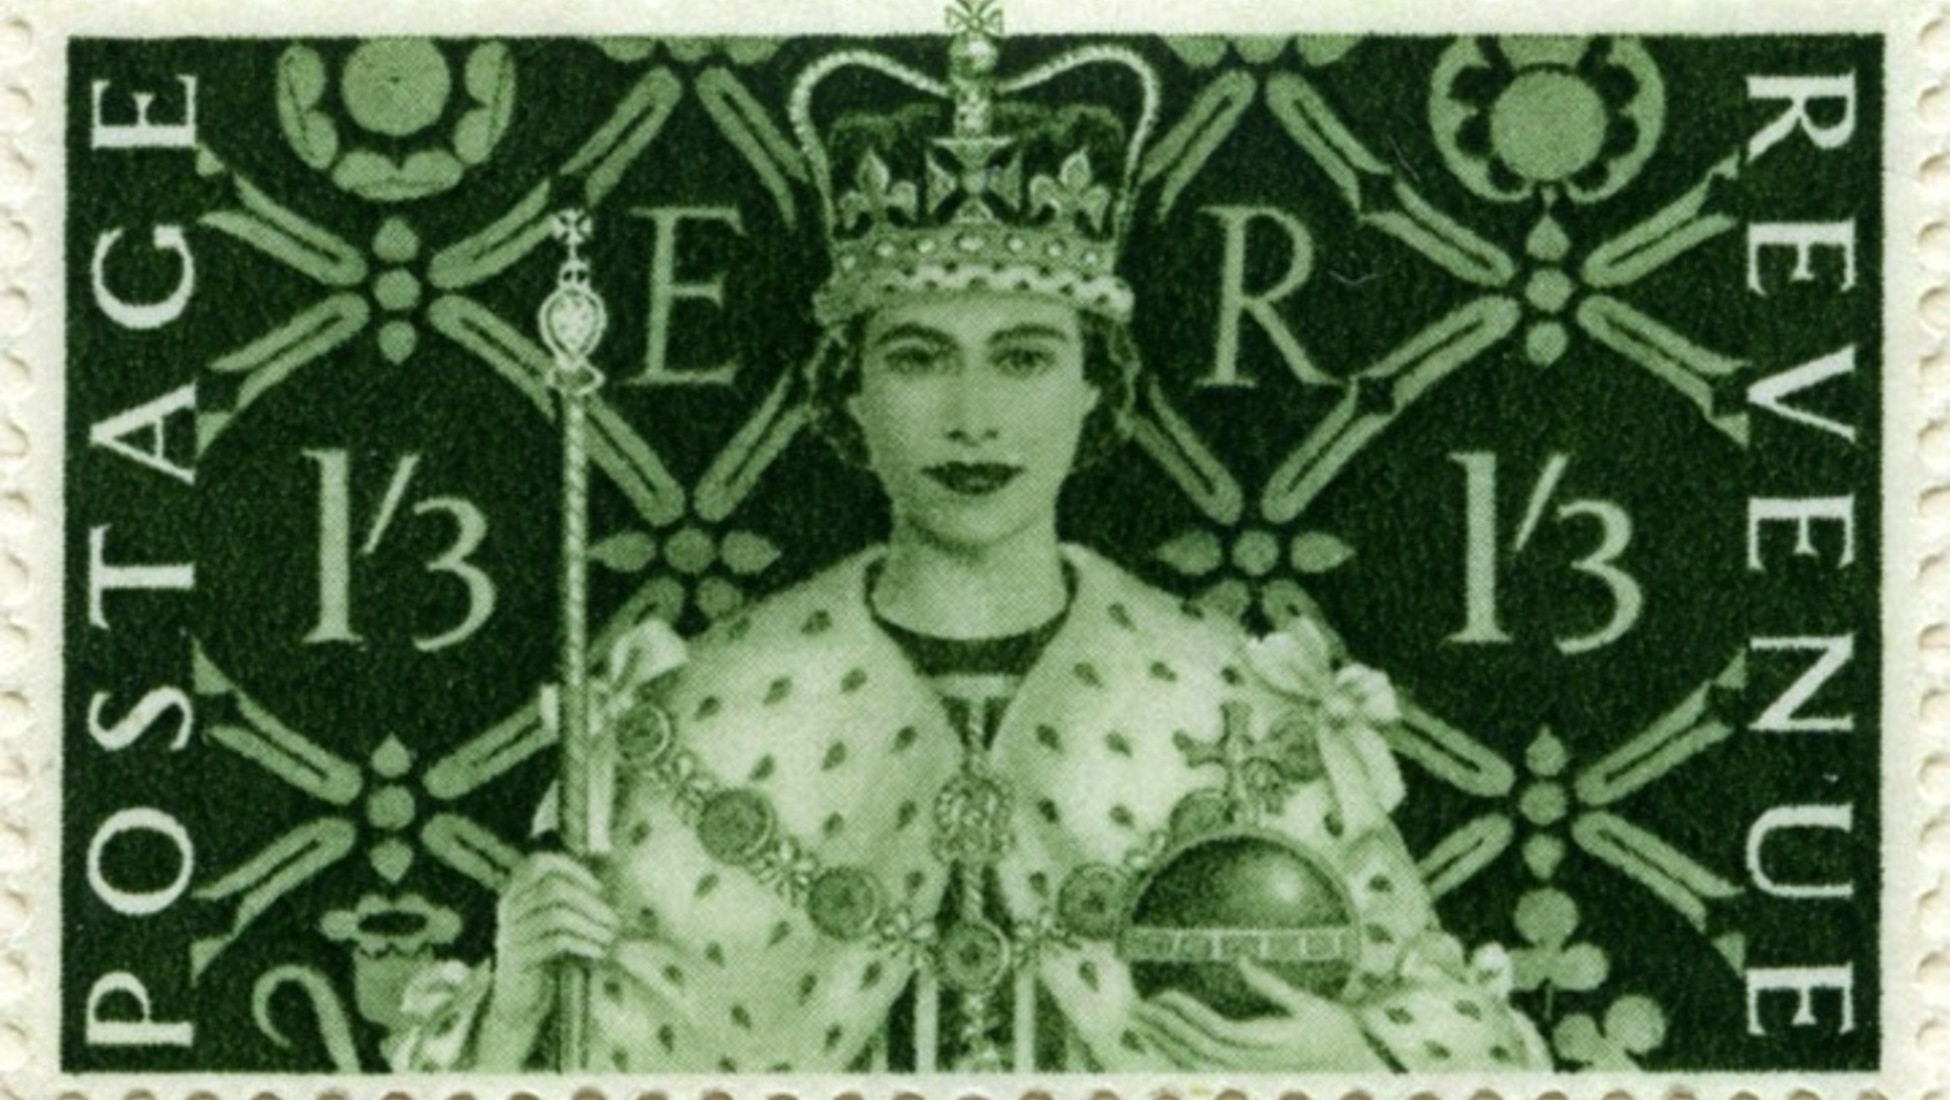 Queen of philately: A history of Elizabeth II's stamp collection - Catawiki